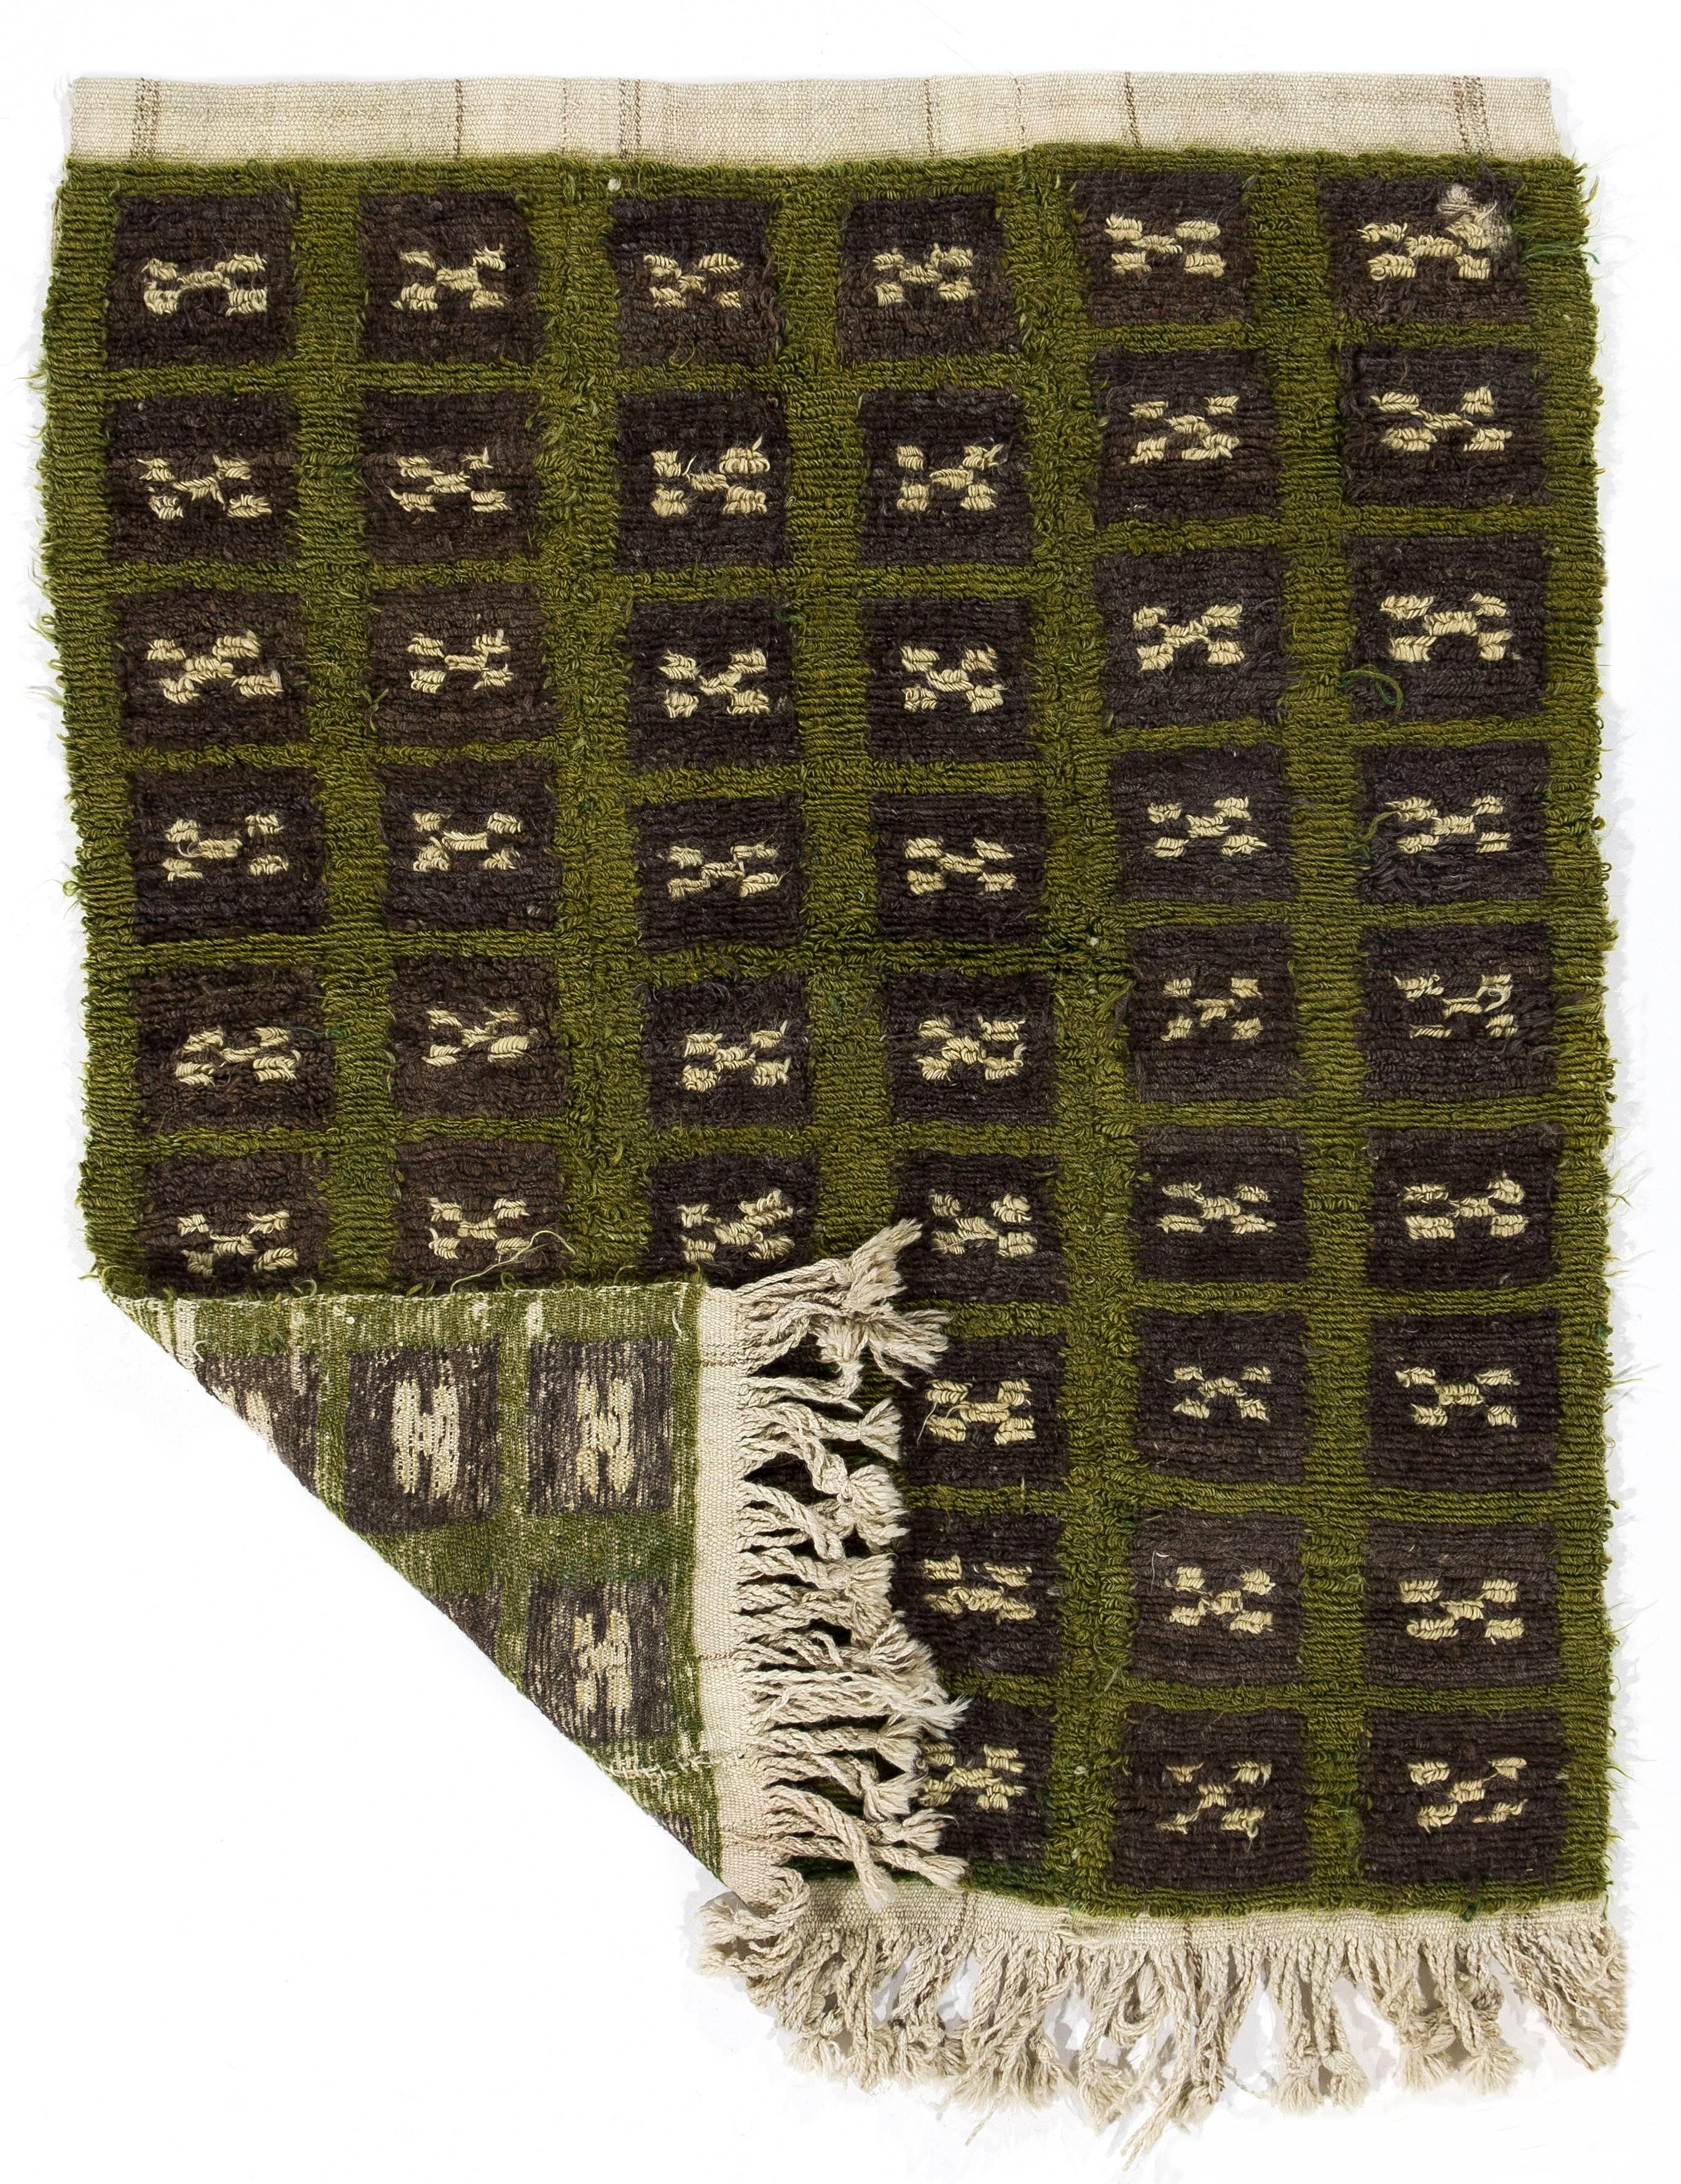 A vintage hand-knotted "Tulu" (Turkish word for "long piled") rug from Konya in Central Anatolia, Turkey.
These charming small rugs with simple modern designs and long lustrous wool pile were produced for daily use by villagers